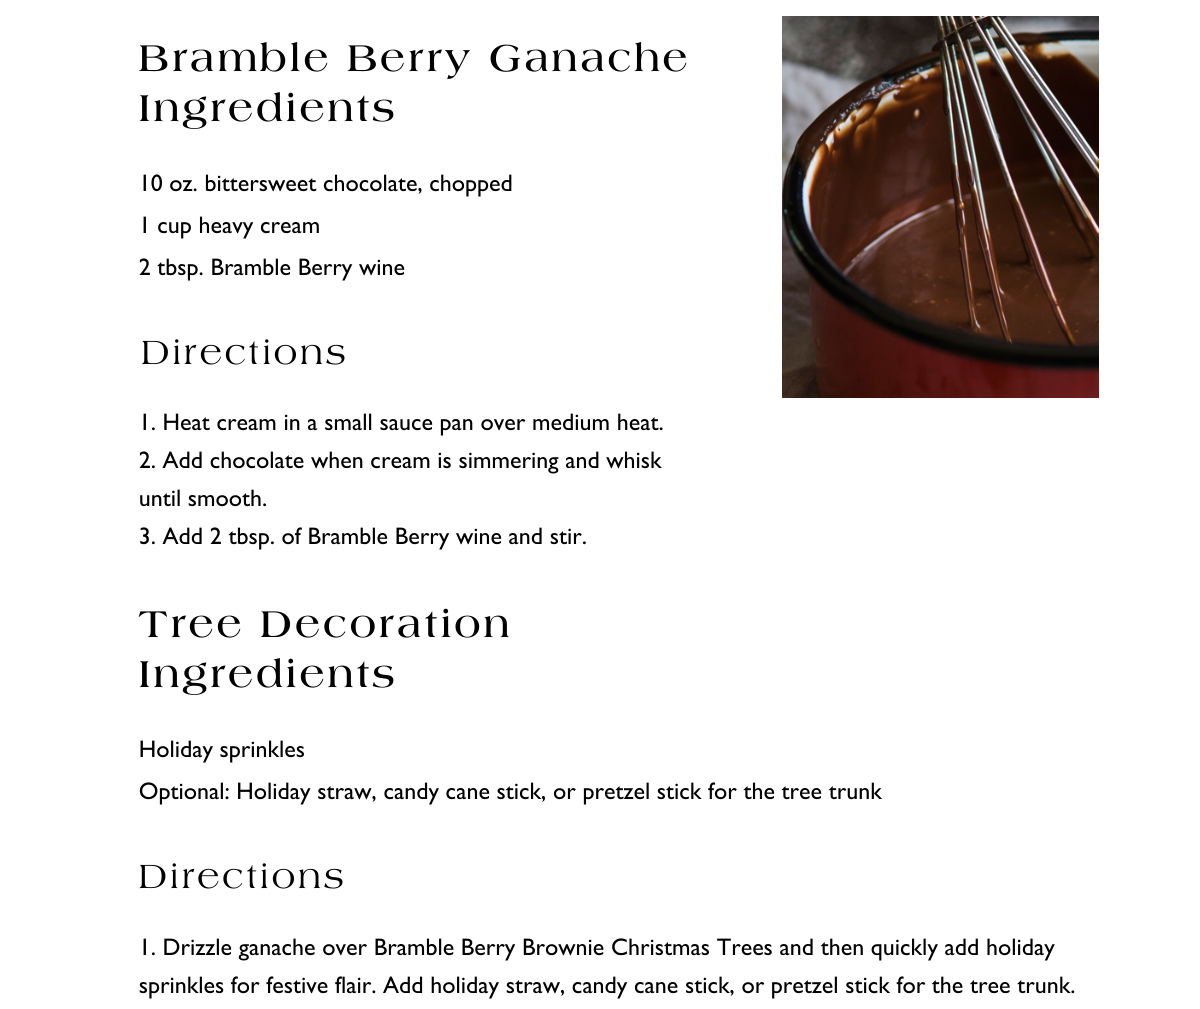 Bramble Berry Ganache ingredients and directions of how to decorate brownies.